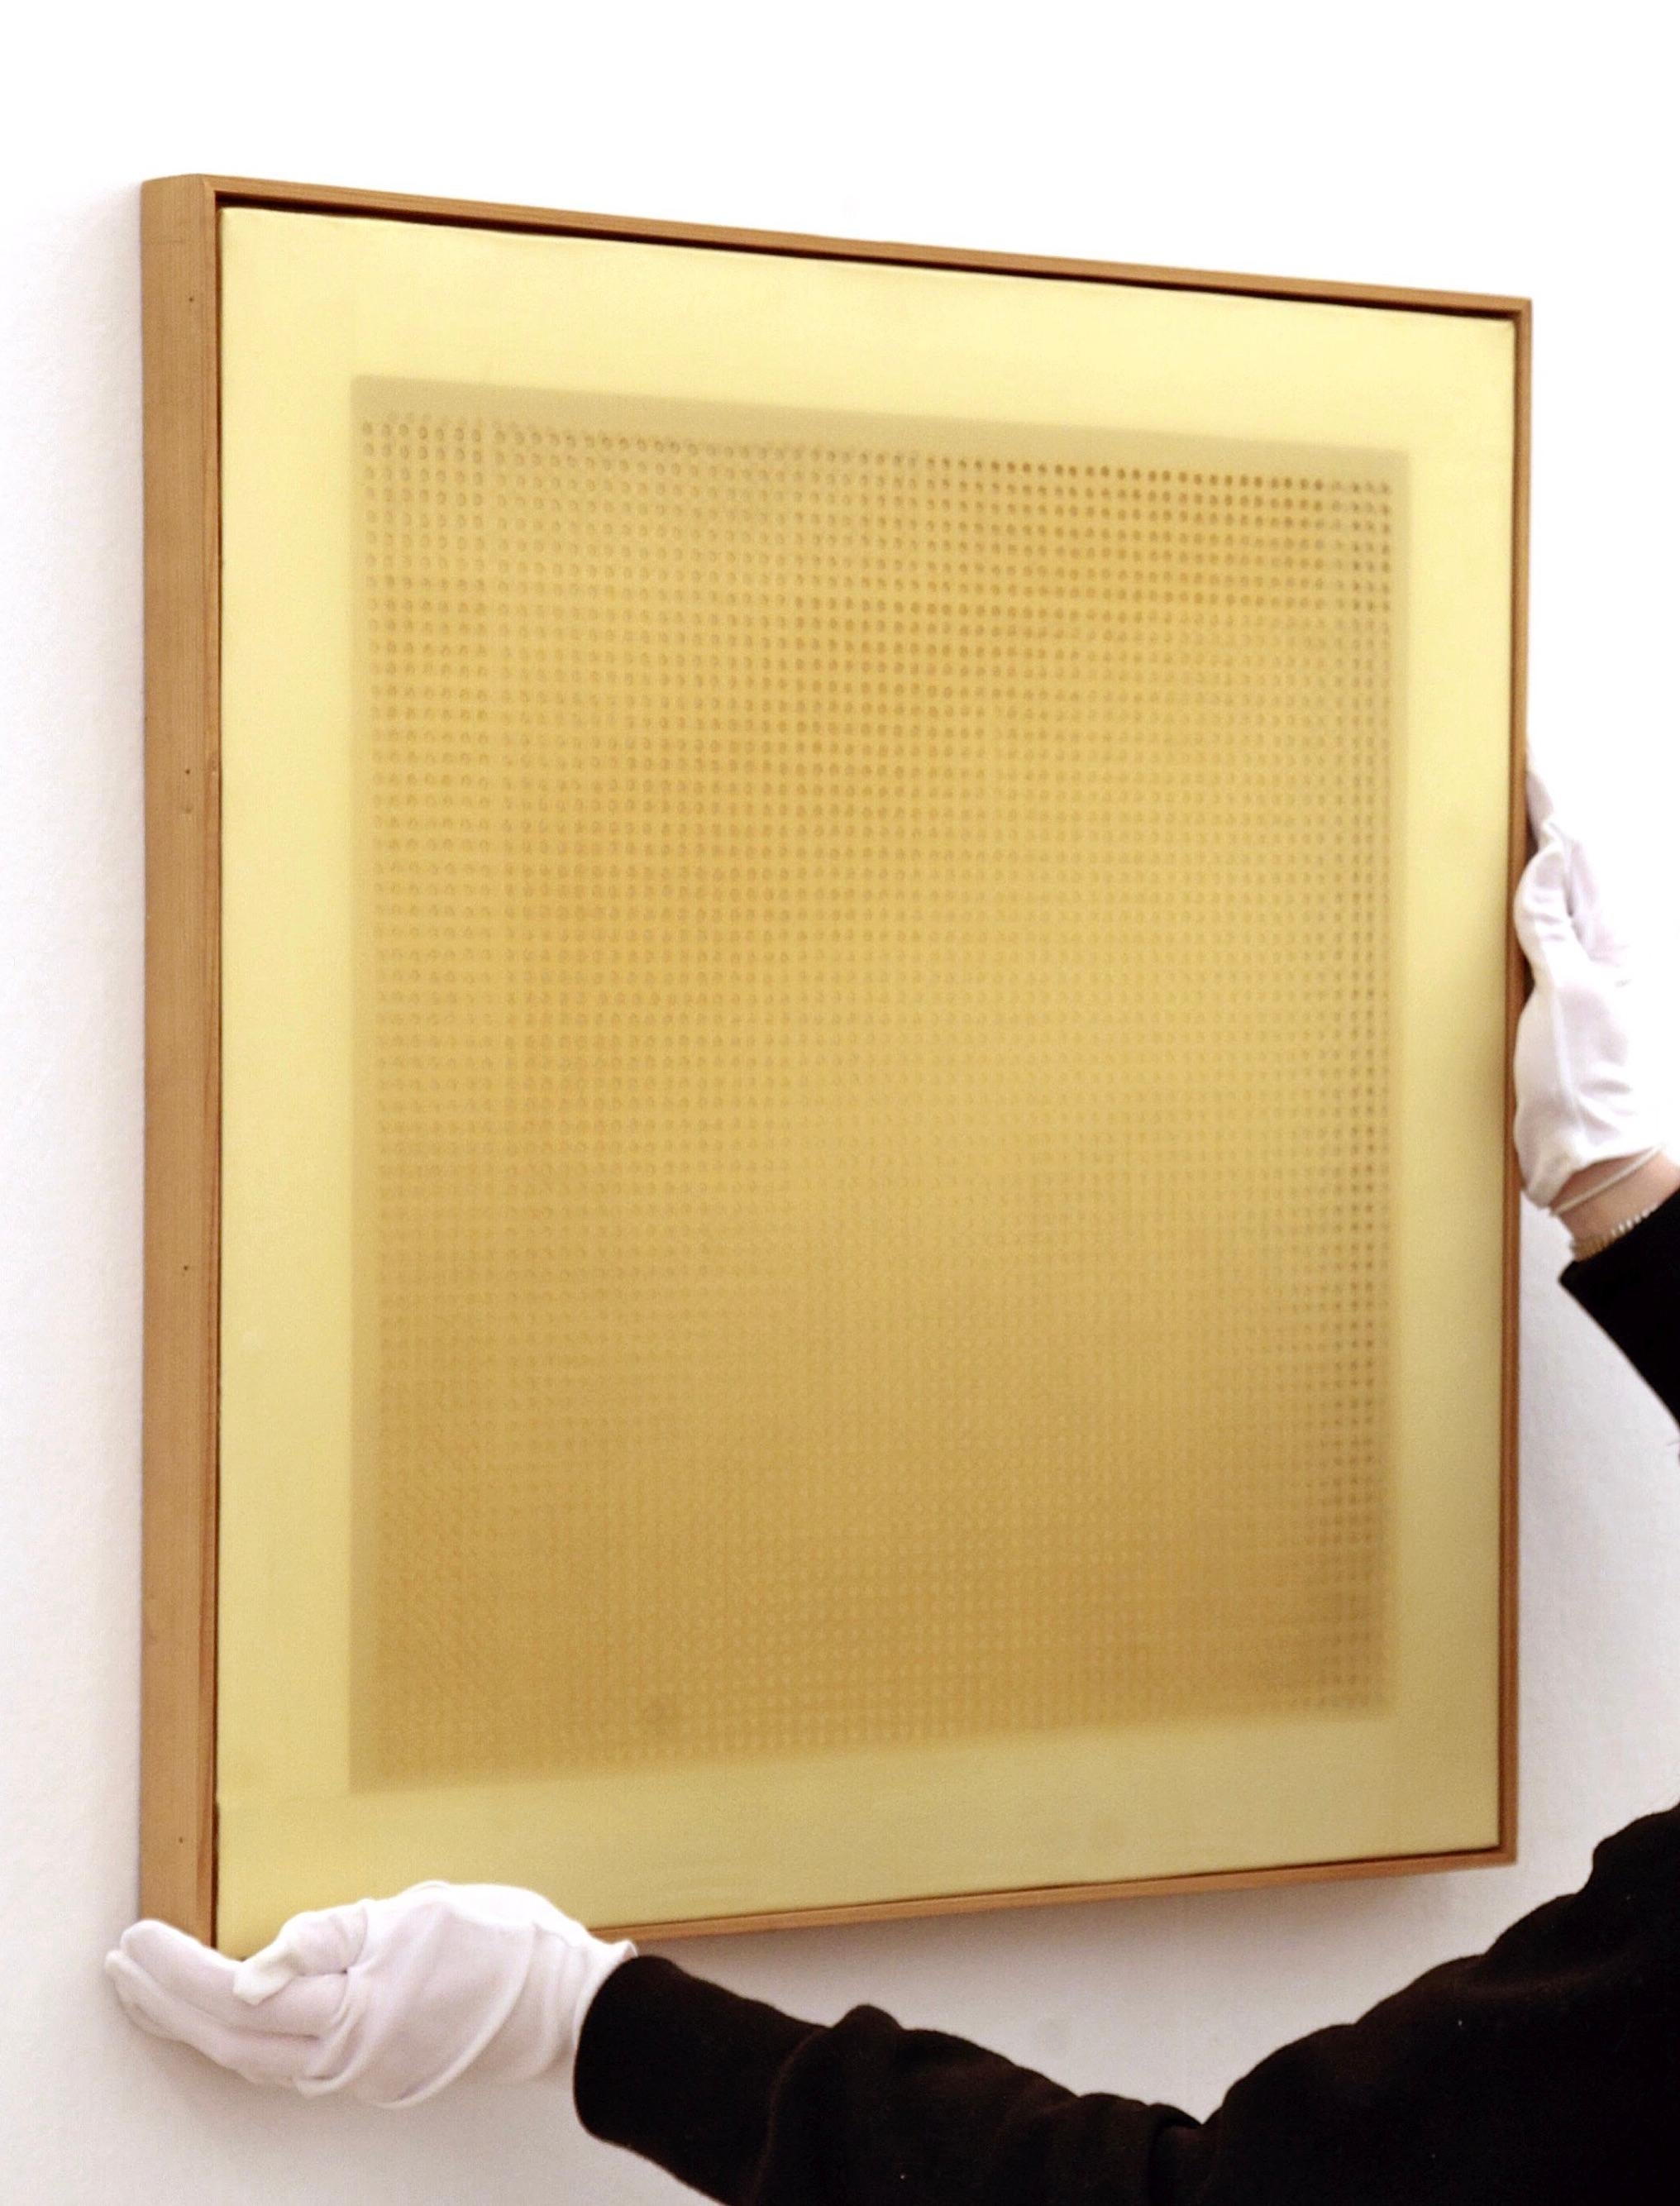 Volume A Moduli Sfasati, 1960, perforated and superimposed plastic canvases  - Minimalist Painting by Dadamaino